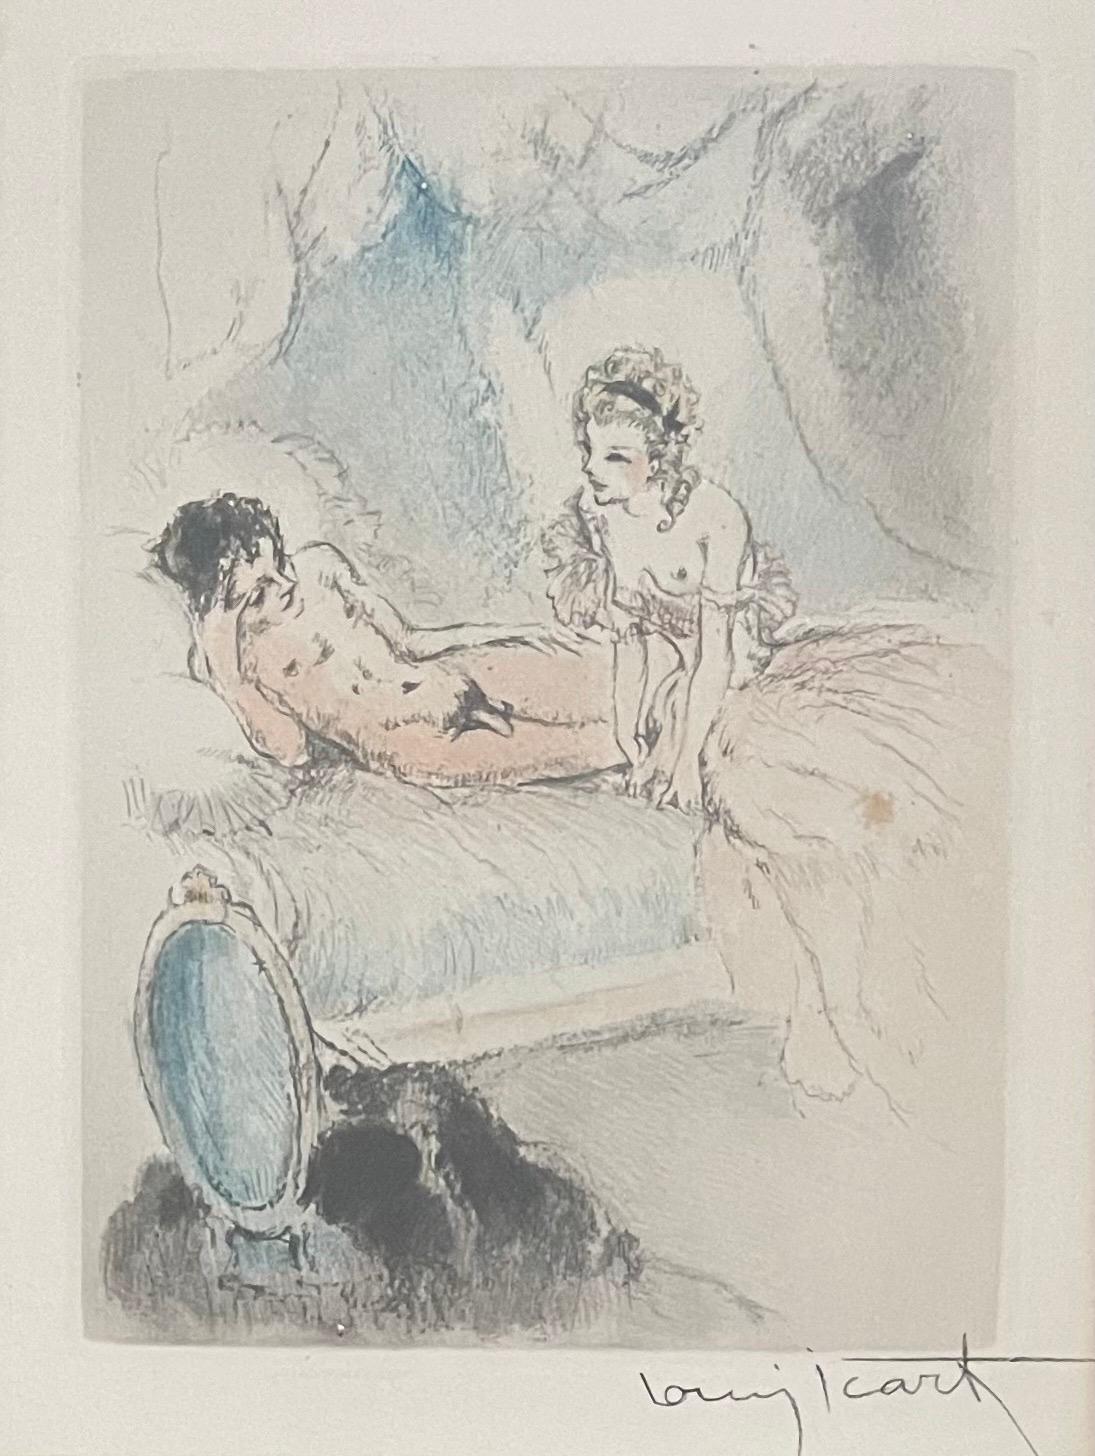 Paper Erotica Etching by Louis Icart from the 